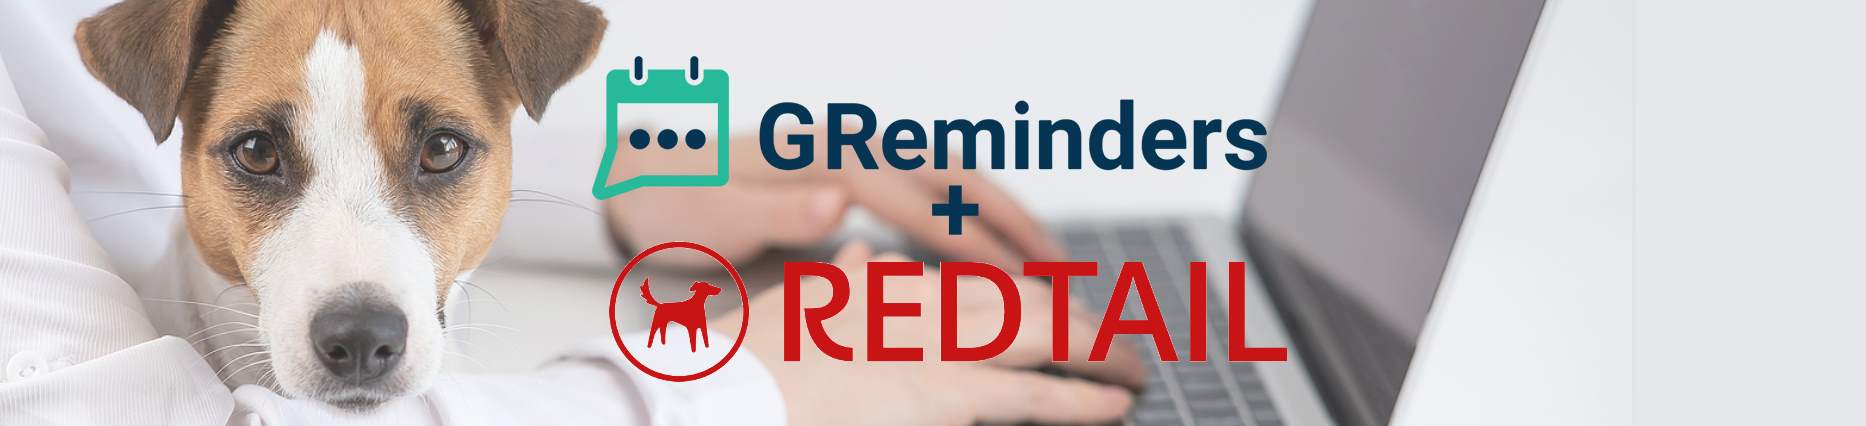 Redtail Text Reminders for Appointments and Automated Client Scheduling | GReminders